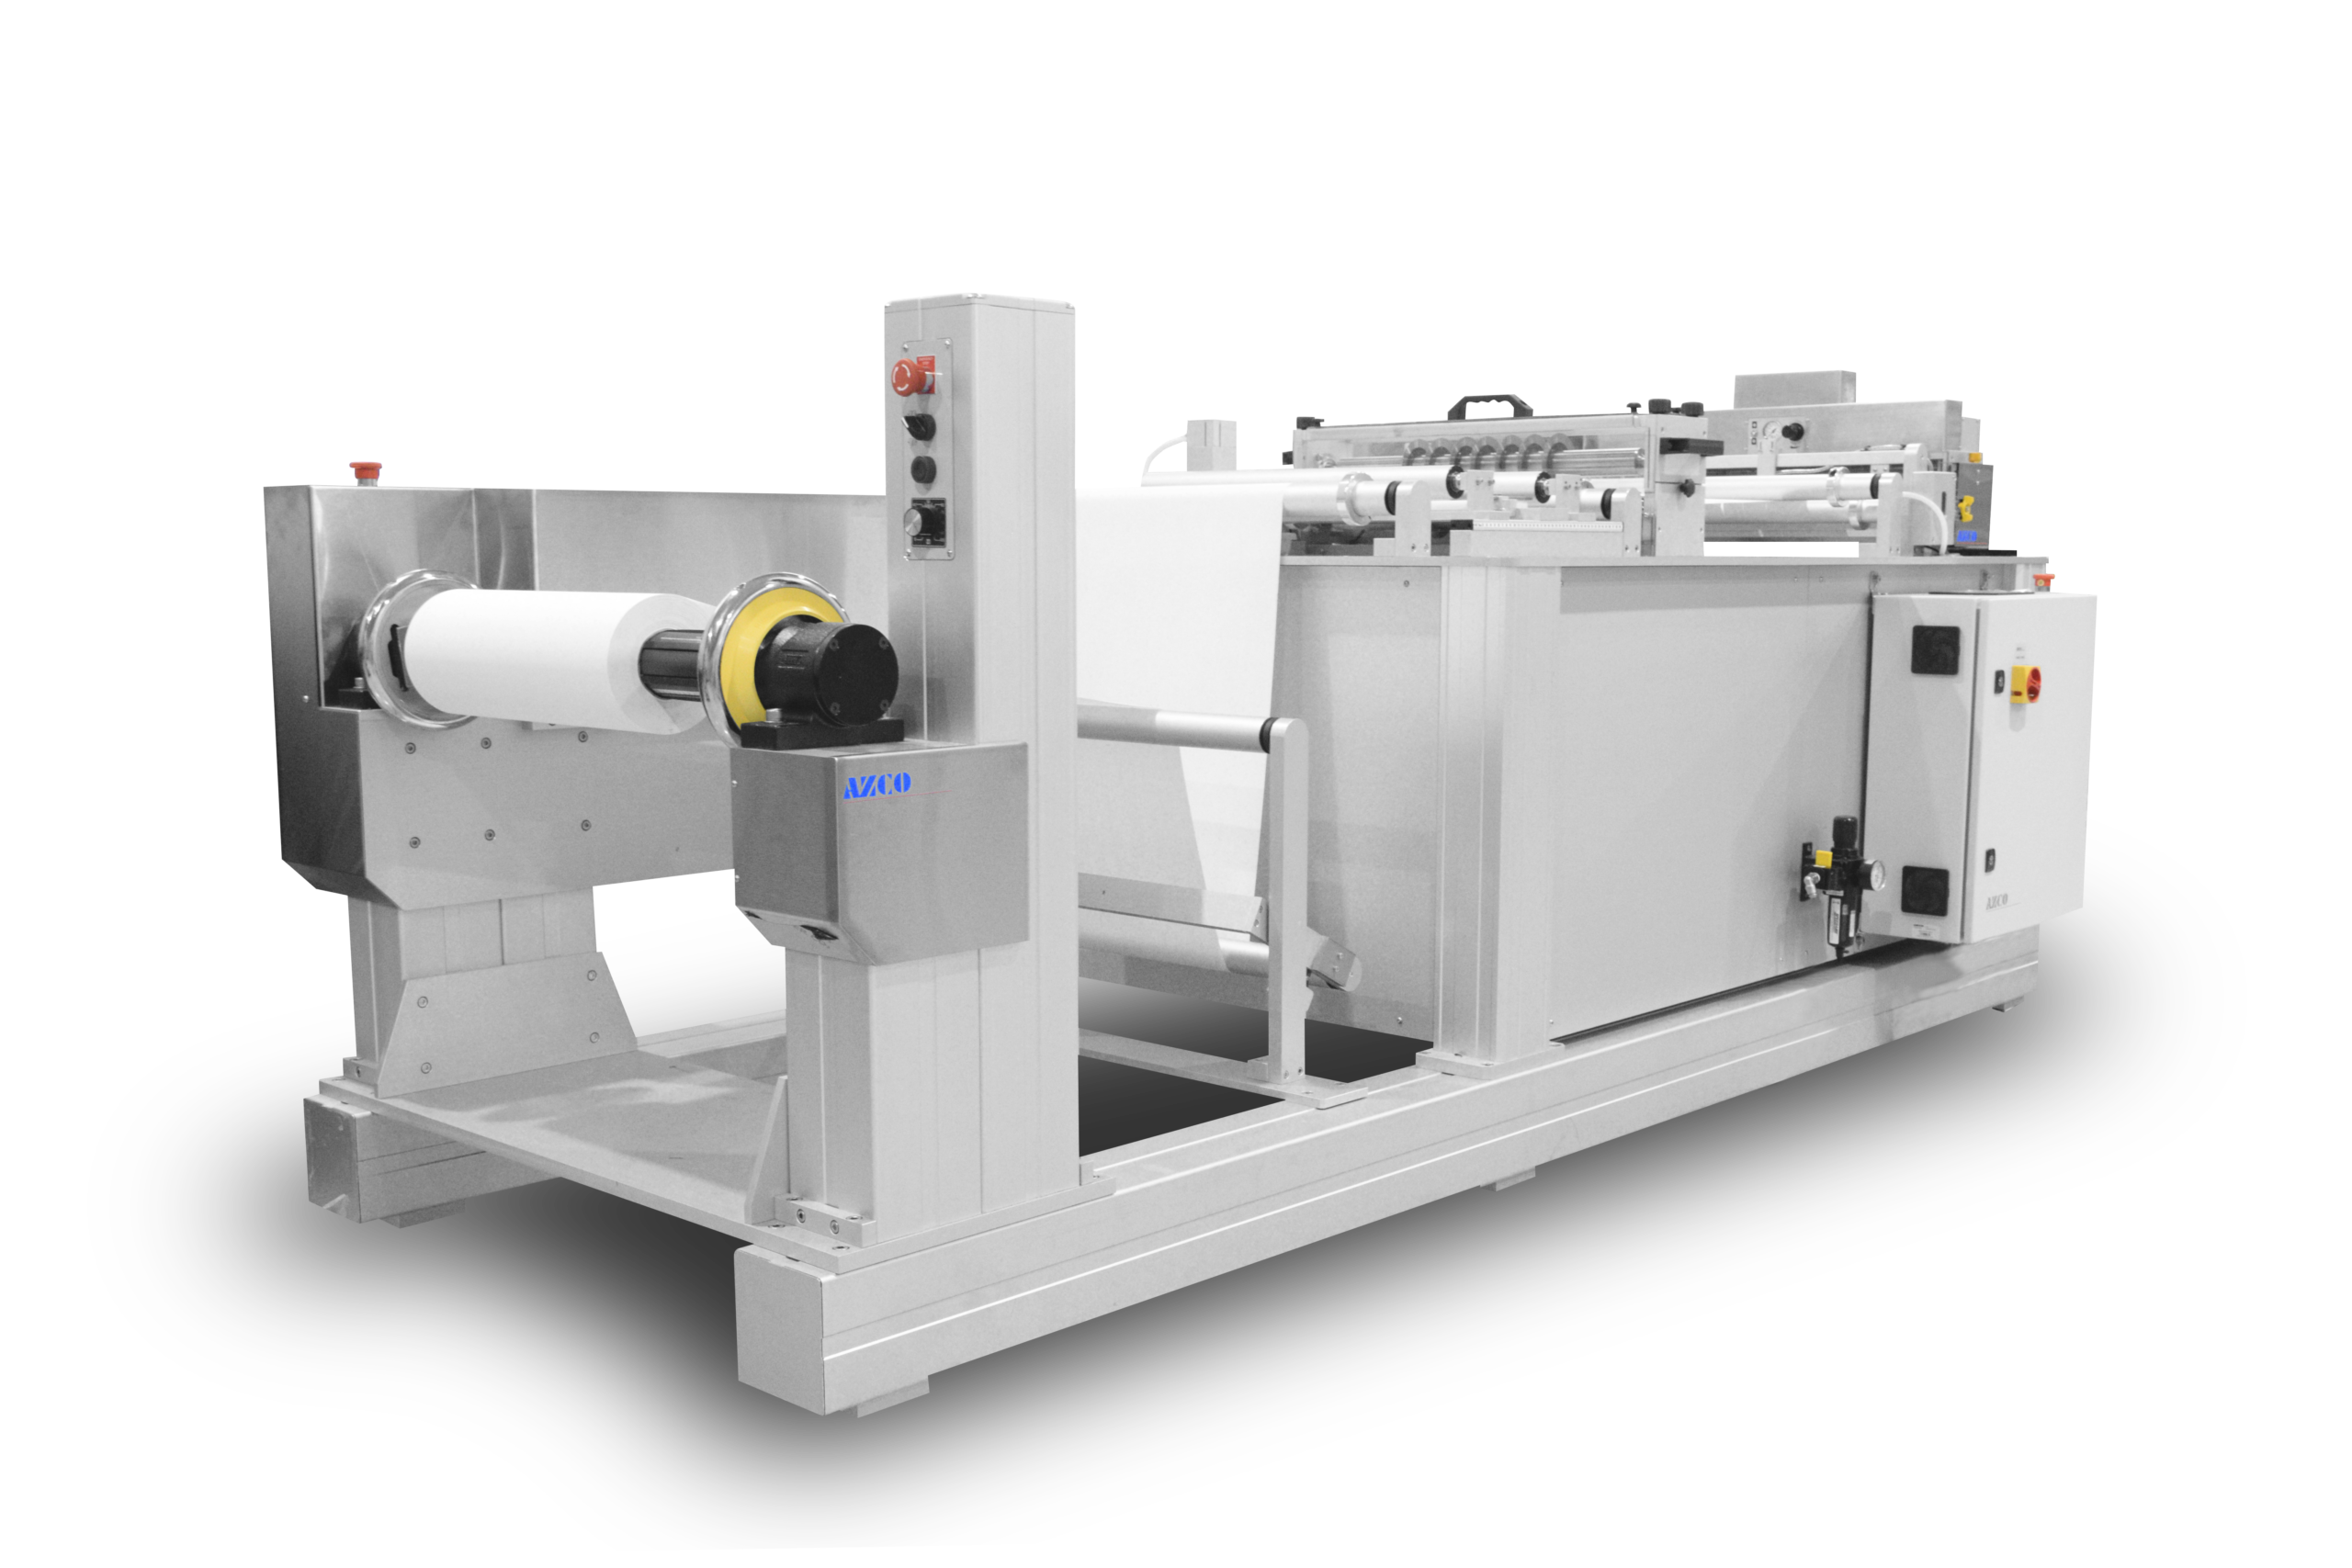 Cut to length station with unwind, precision punch assembly and shear cut slitter assembly cuts paper and film in roll form